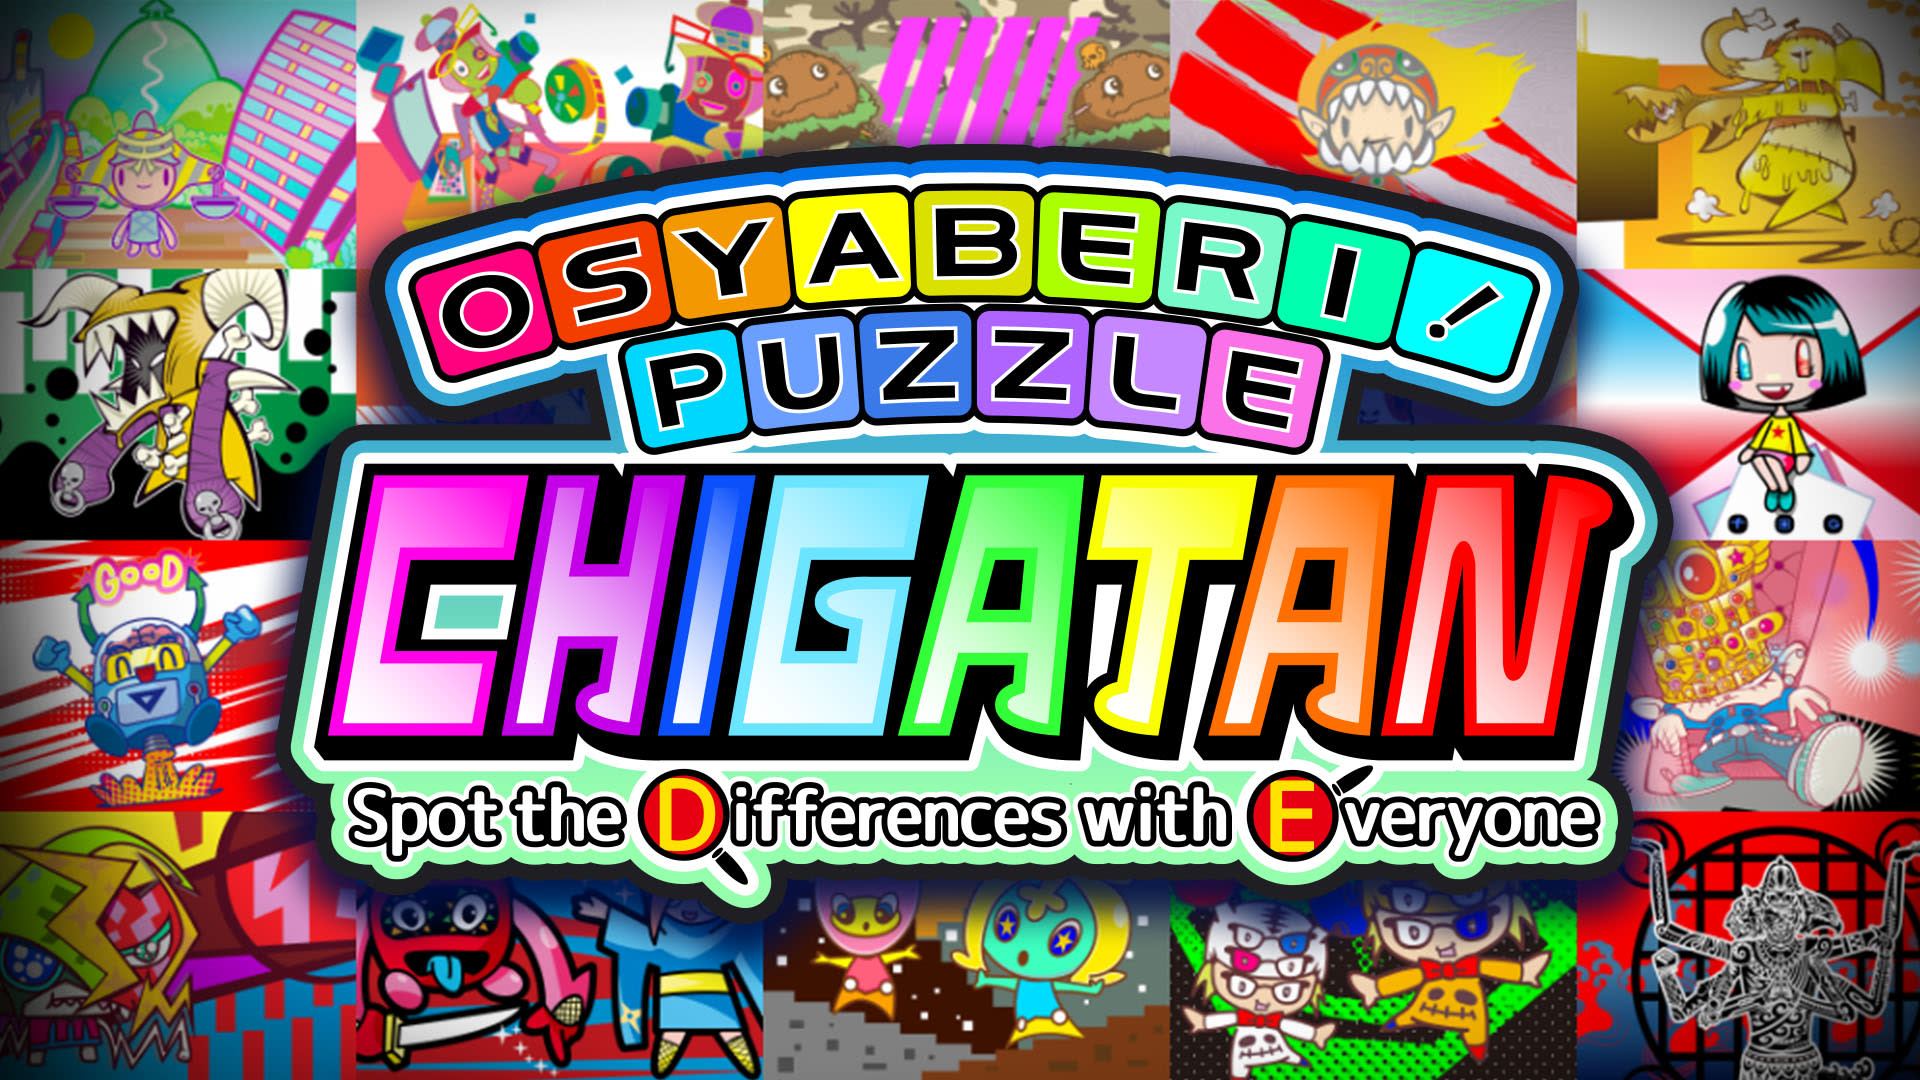 Osyaberi! Puzzle Chigatan ～Spot the Differences with Everyone～ 1